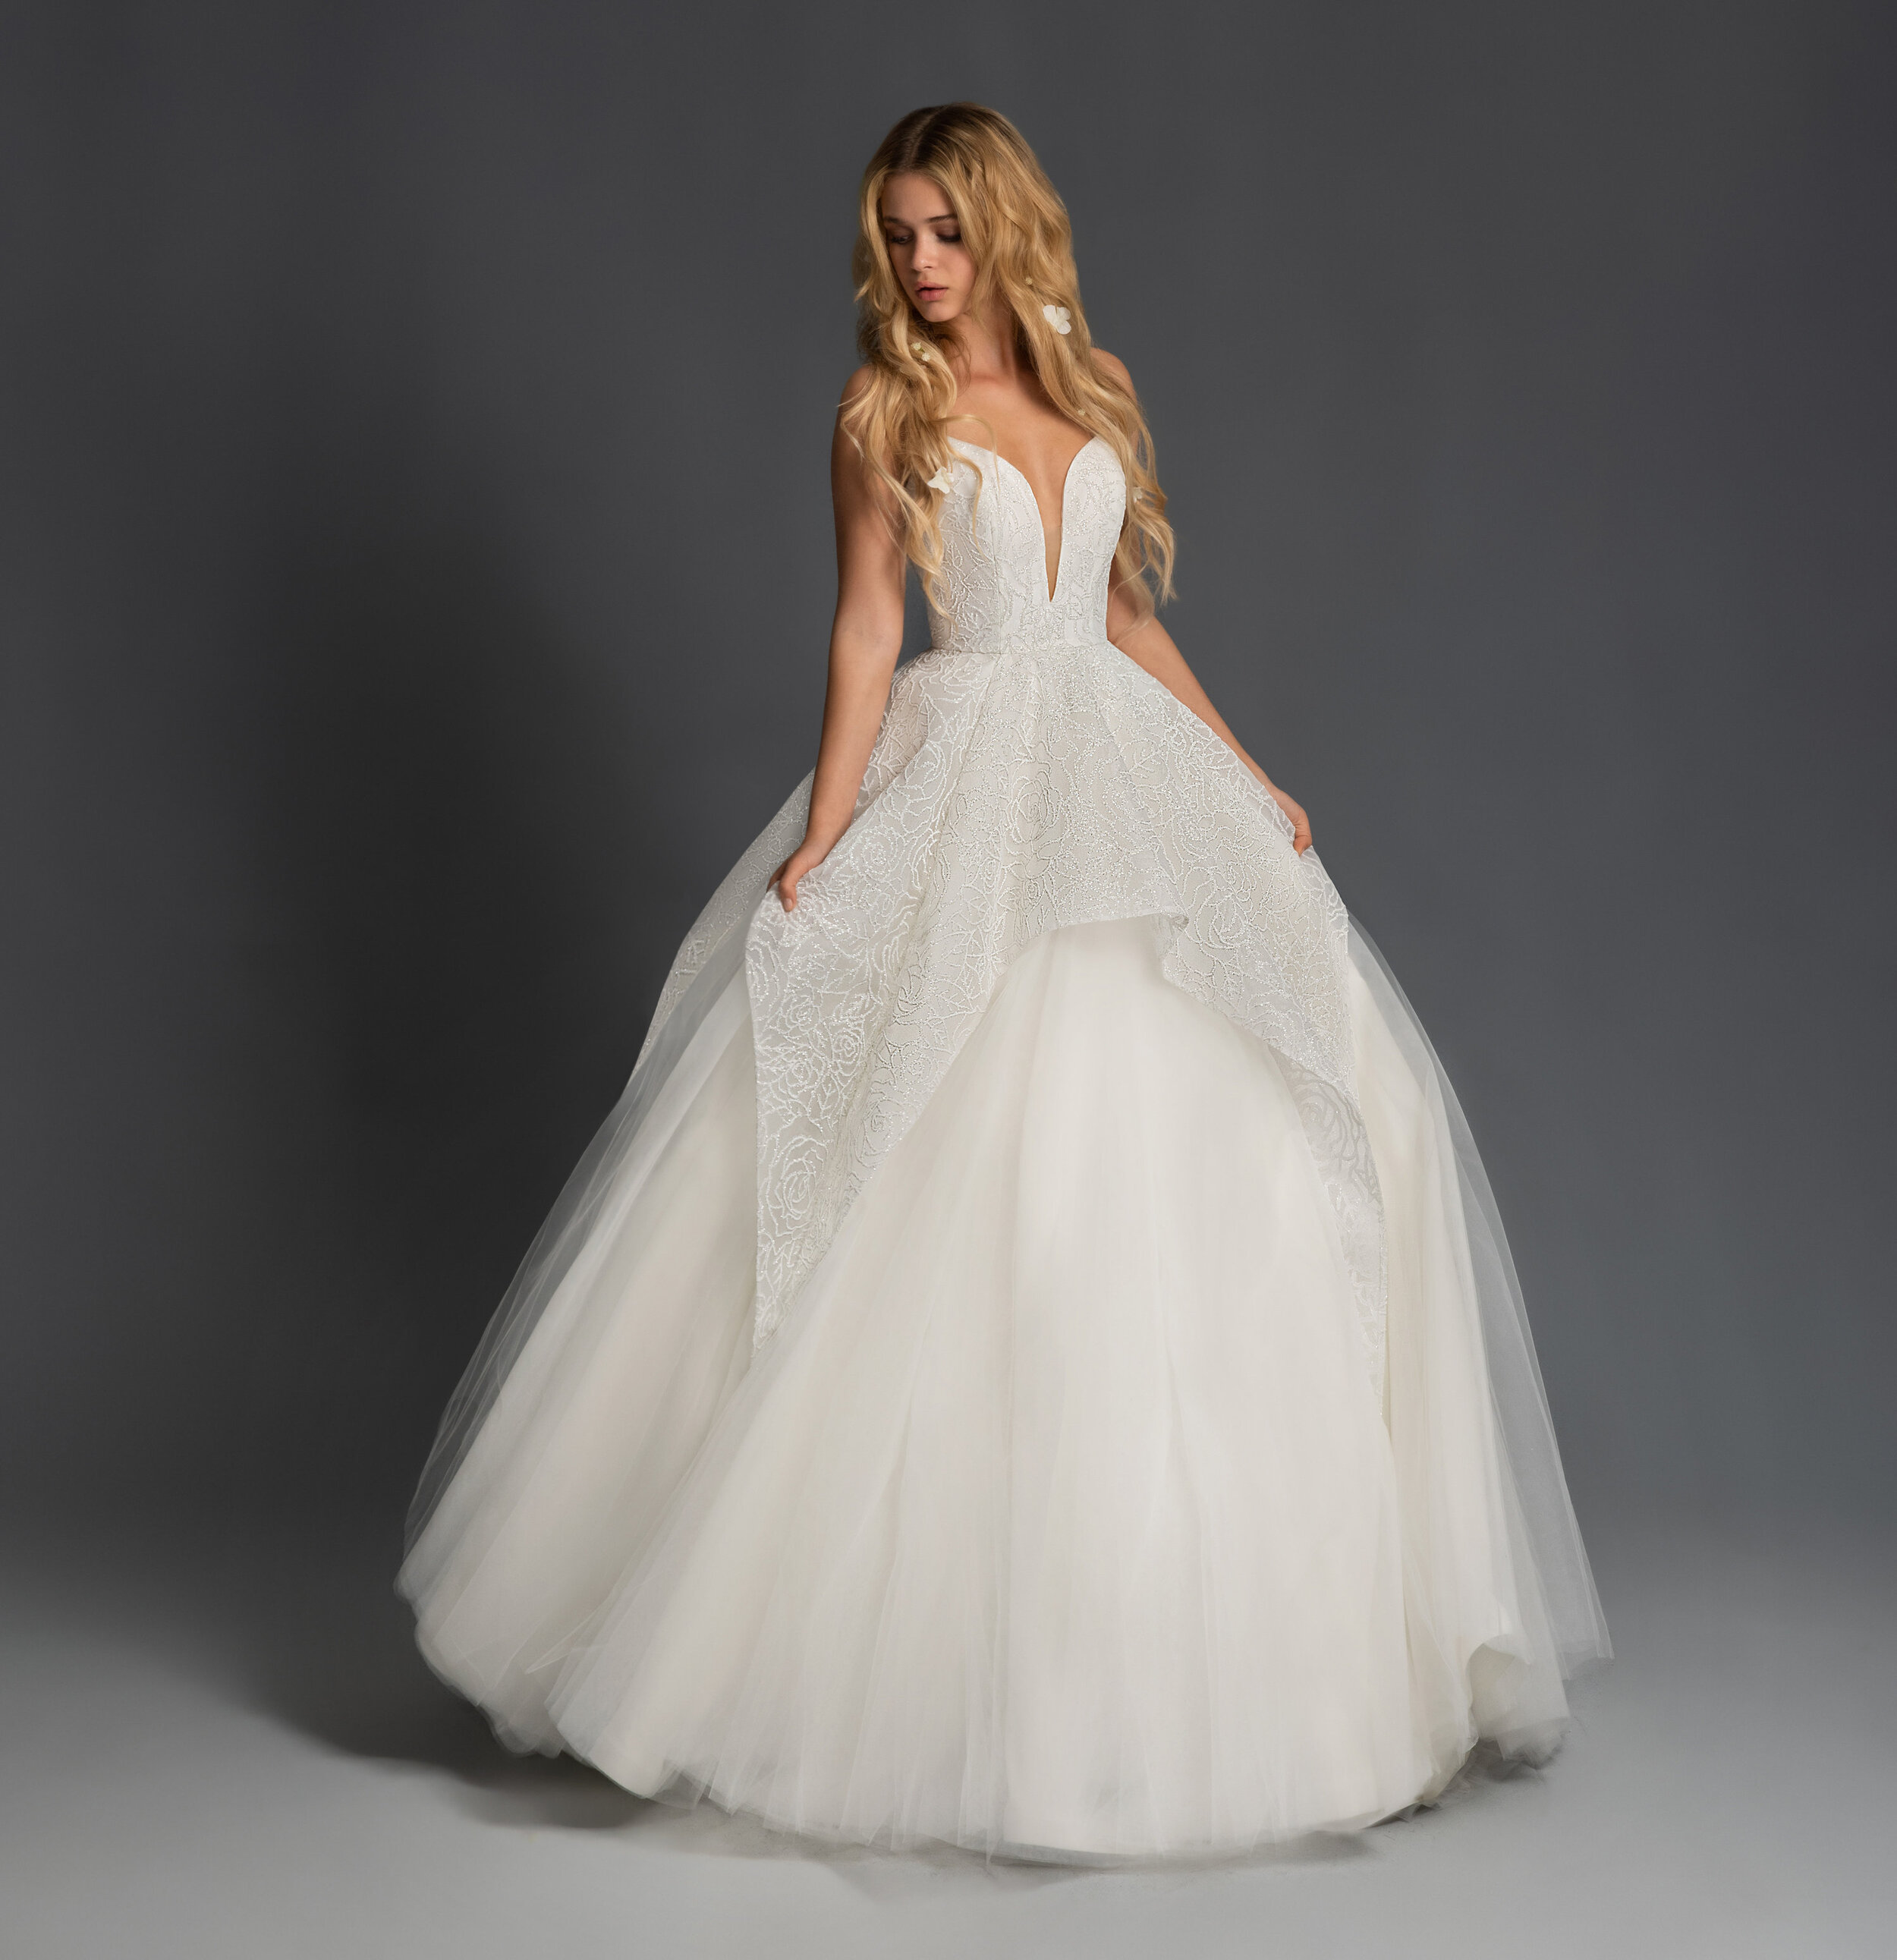 Designers - bridal gowns from Hayley Paige, Matthew Christopher